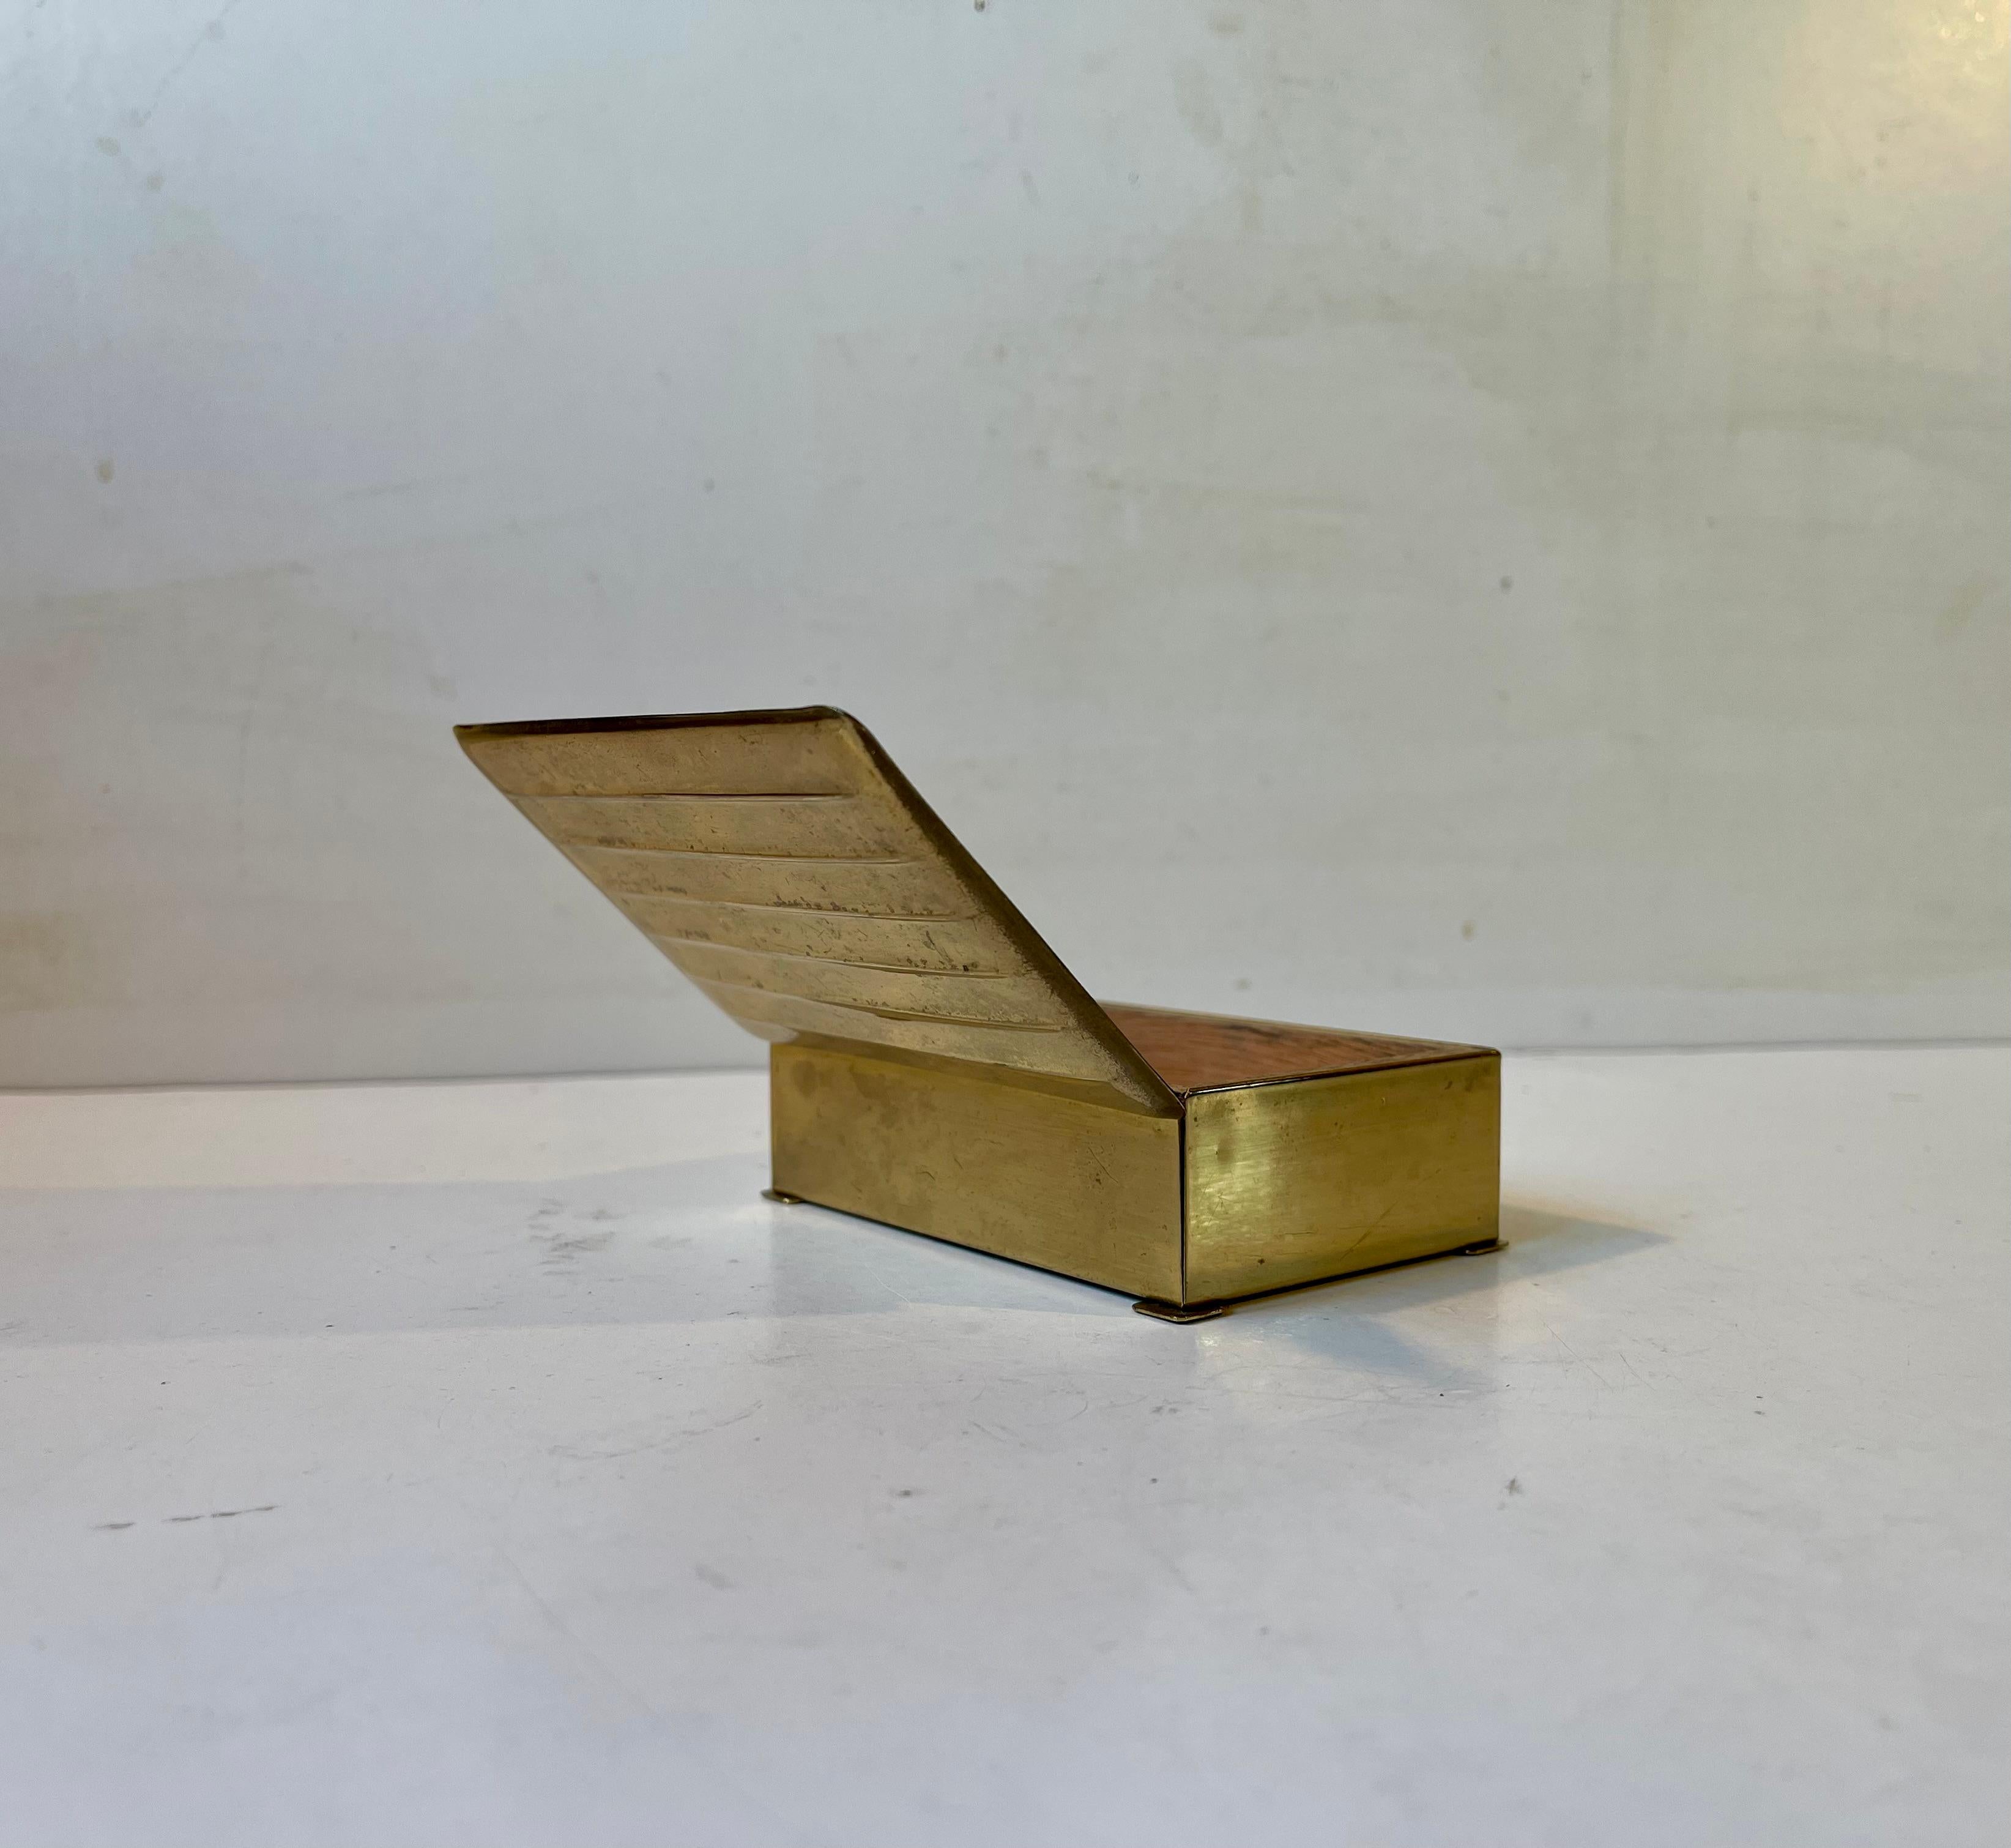 A brass cigarette or cigar box decorated horizontal ribbings/lines. It was made by an anonymous craftsman/designer in Scandinavia during the 1930s. It features a wooden lining that protects your tobacco. Measurements: W: 10 cm, Dept: 6.5 cm, Height